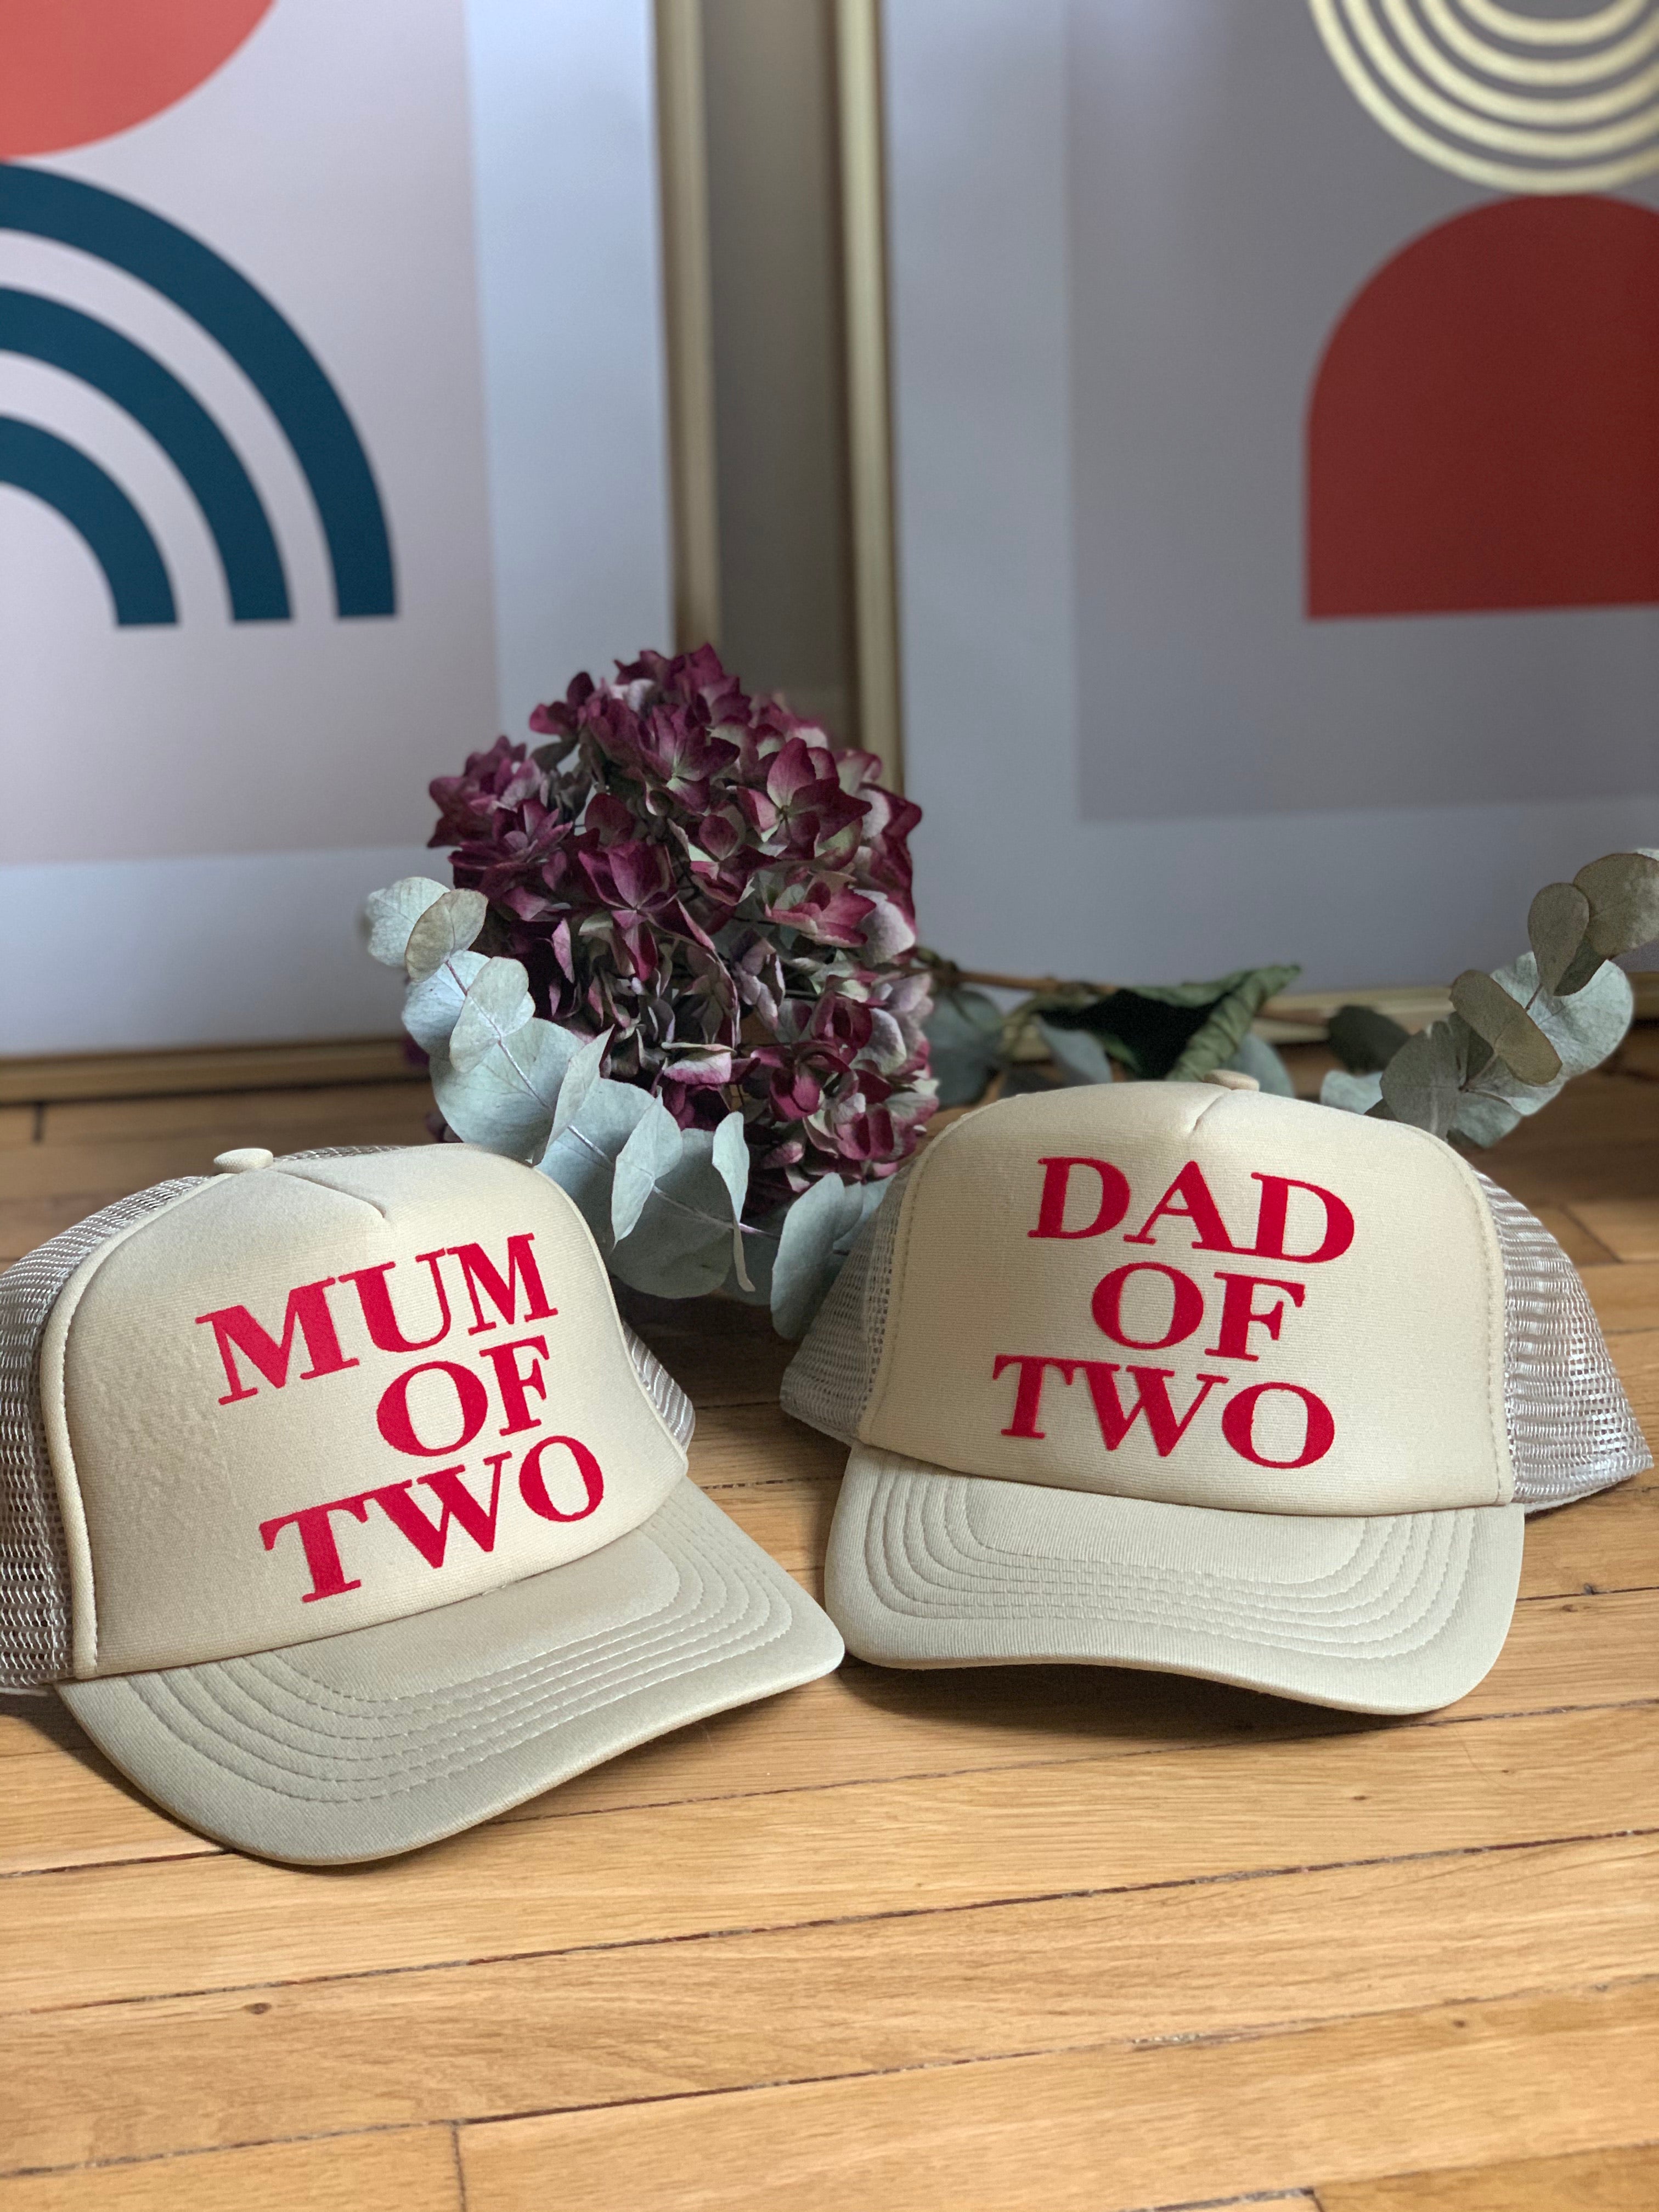 CASQUETTE DAD OF - SABLE - Disponibles pour les DAD OF ONE, TWO, THREE...